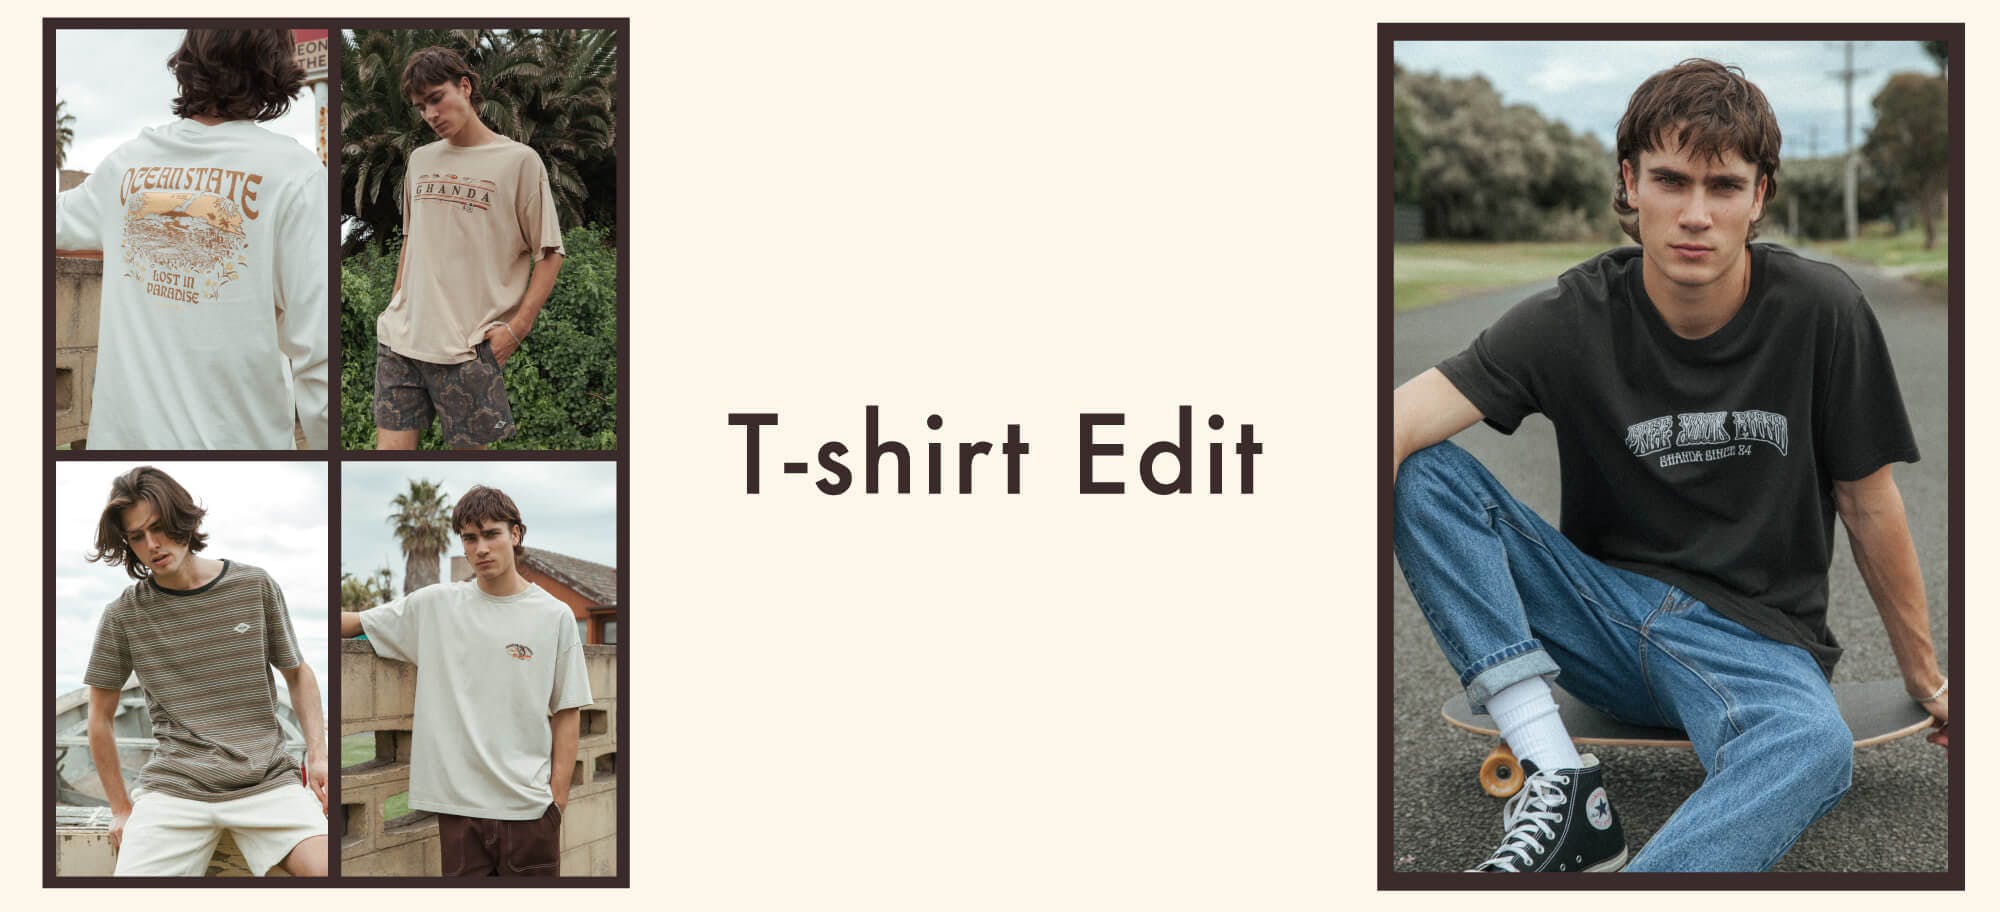 Four images framed by brown box. Top left male model wears white long sleeve tee. Top right male model wears jam shorts and beige tee with fishing embroidery. Bottom left male model wears stripe brown tee. Bottom right male model wears neutral T-Shirt. T-shirt Edit text in middle. Right, large image male model wears black T-Shirt with a graphic print and denim blue jeans.